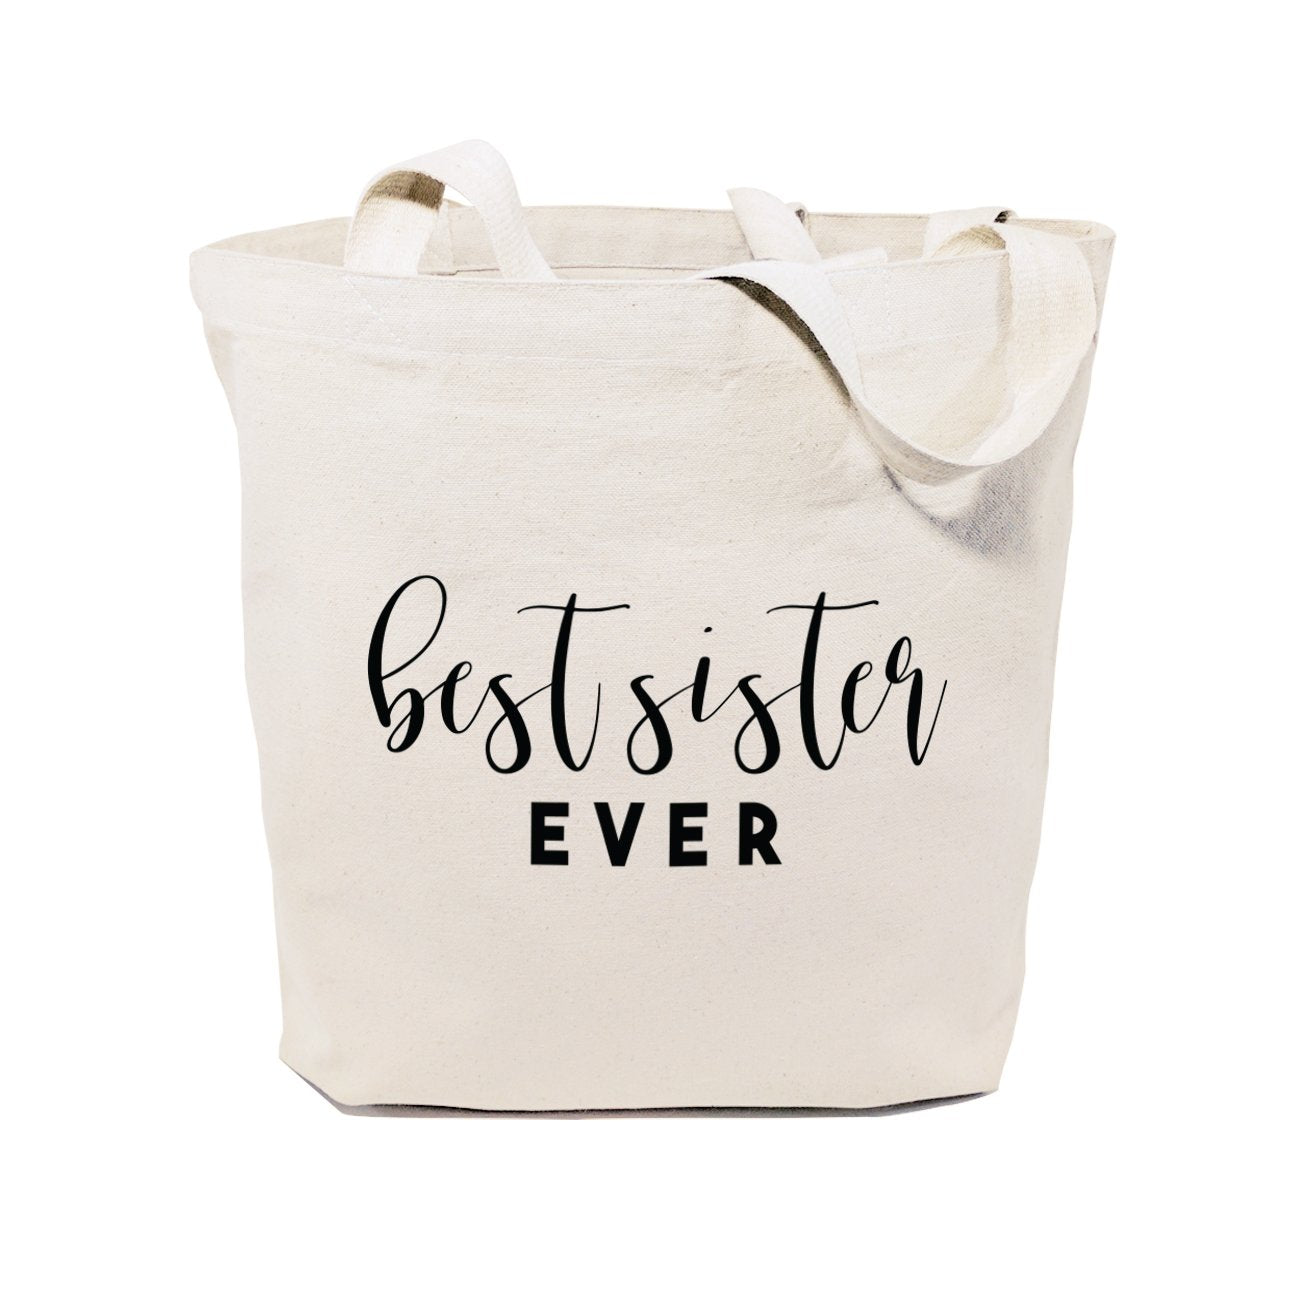 Best Sister Ever Cotton Canvas Tote Bag